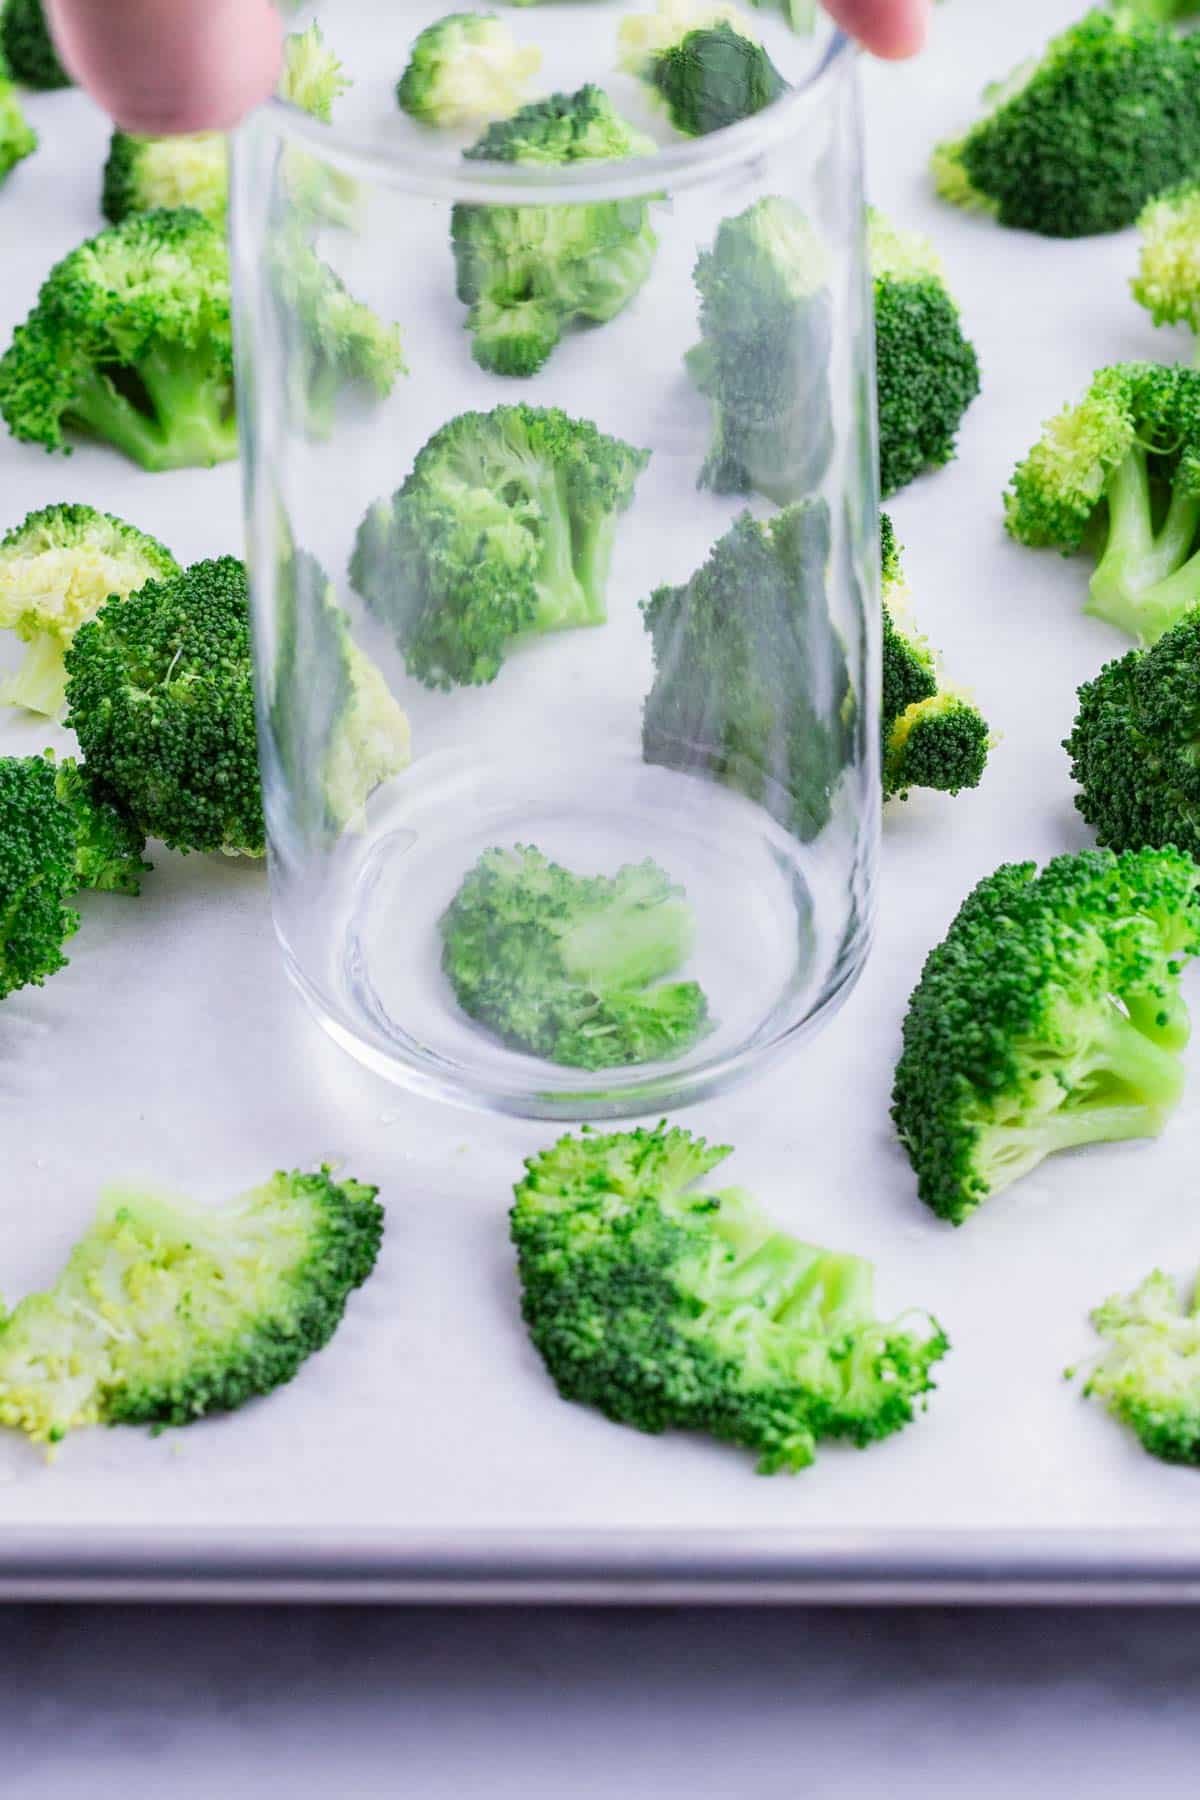 Boiled broccoli is smashed with the bottom of the glass.